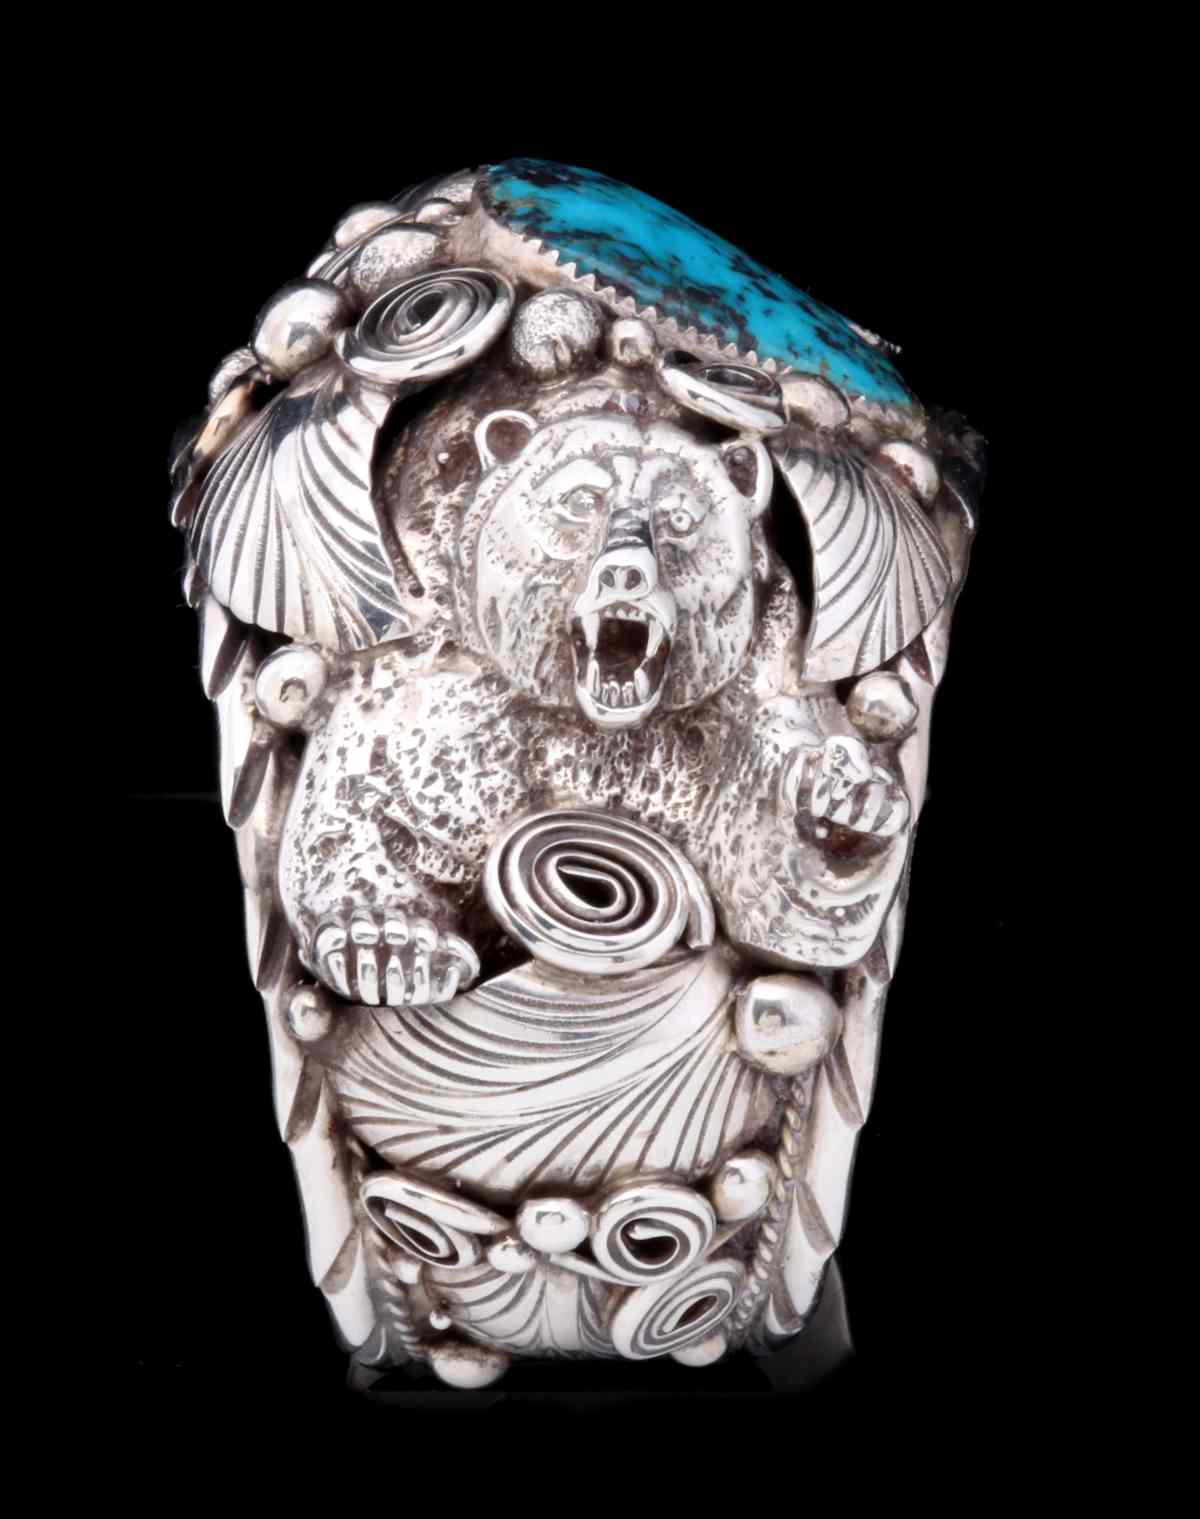 A HIGHLY DECORATED NAVAJO SILVER & TURQUOISE CUFF